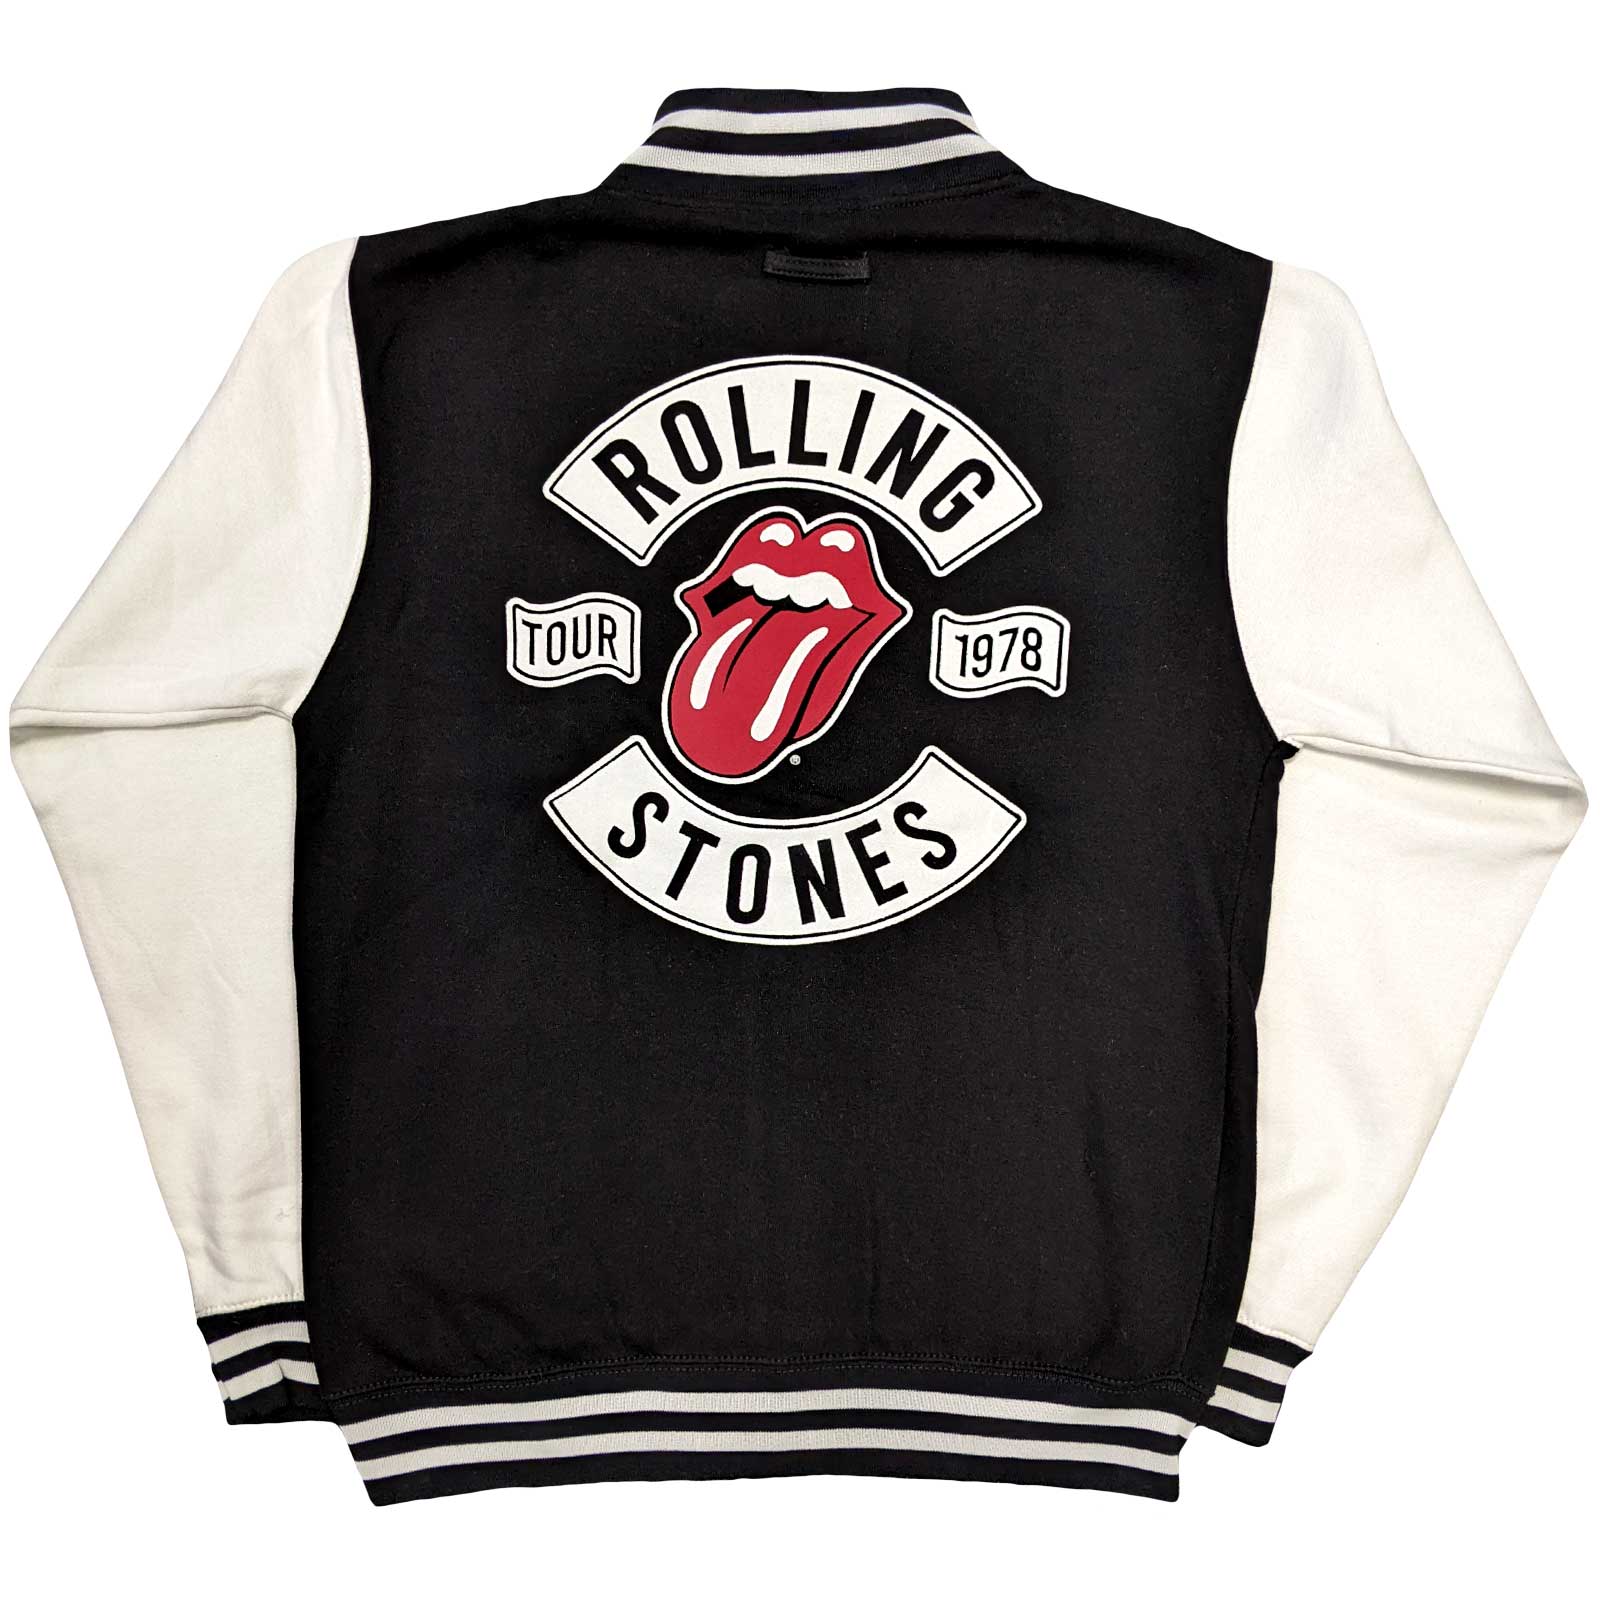 THE ROLLING STONES TOUR 78